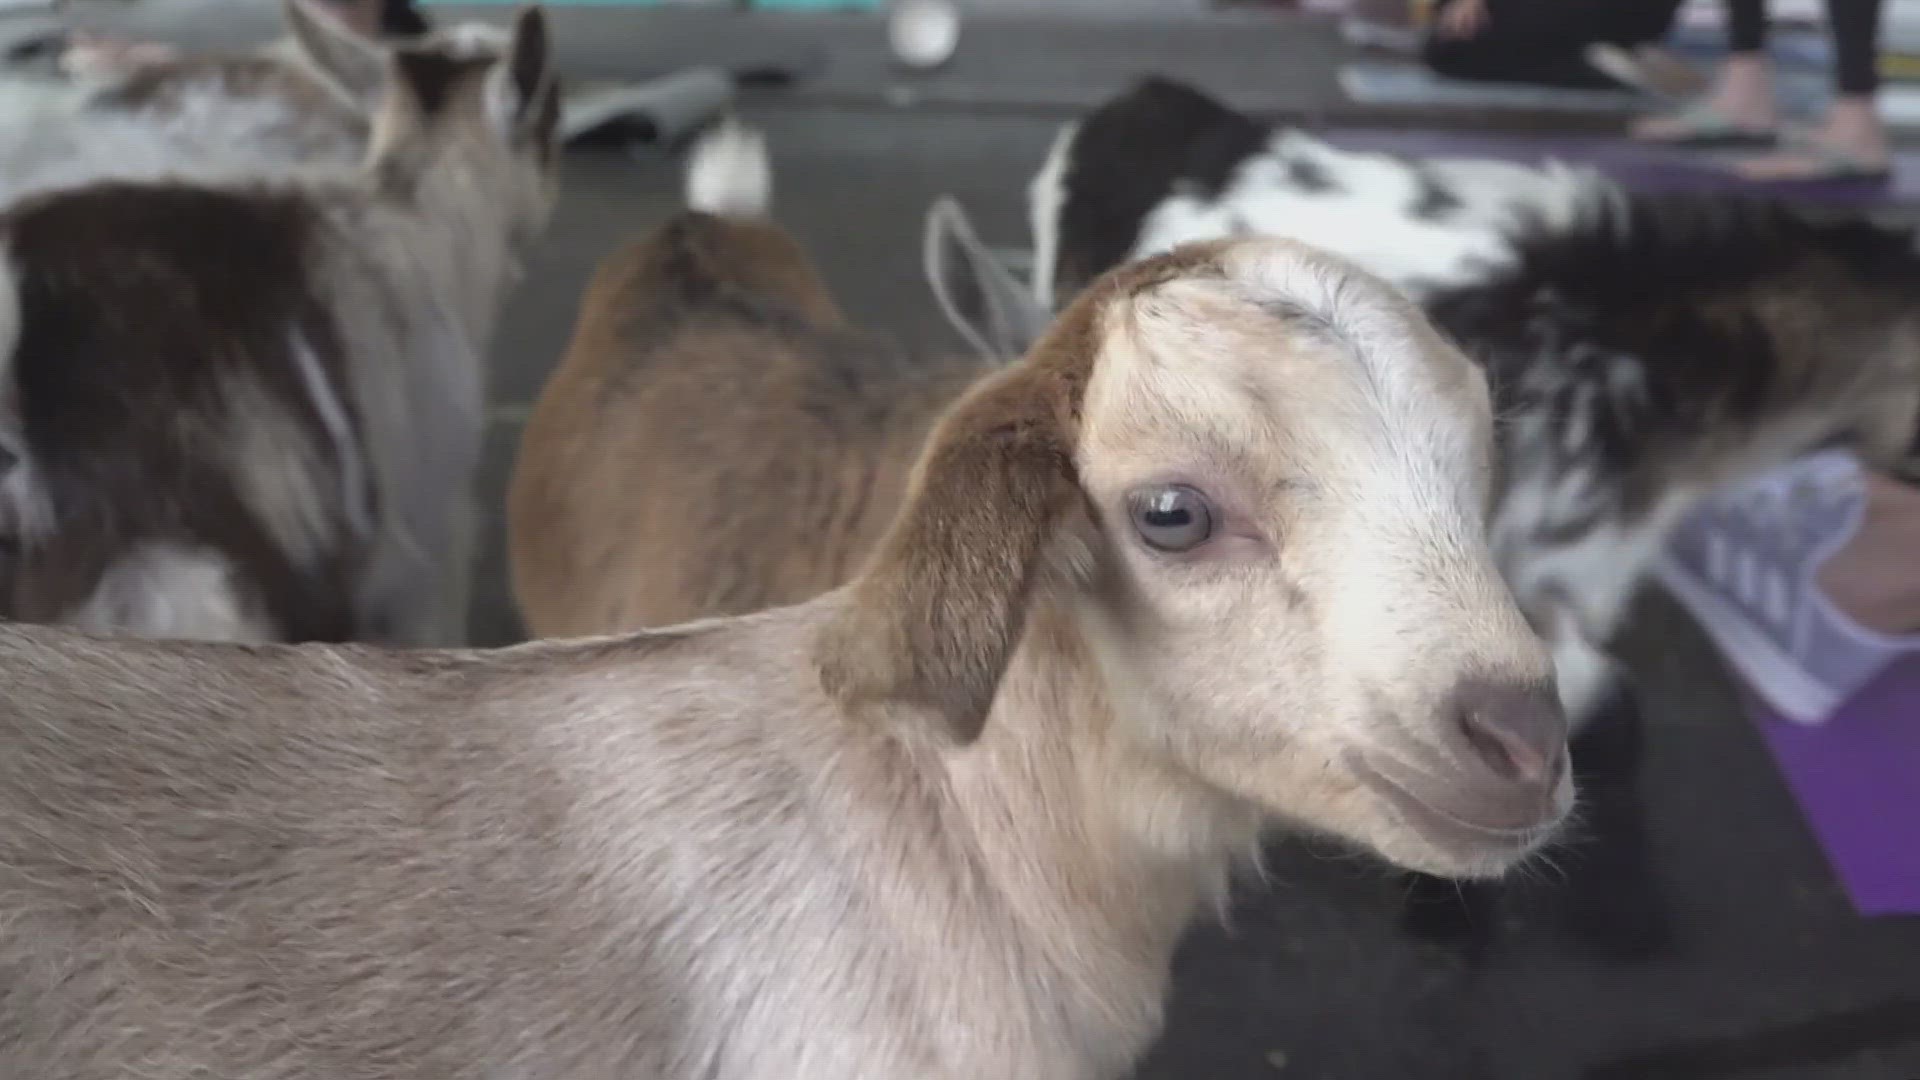 People got to unwind at the zoo's yoga class with adorable baby goats!